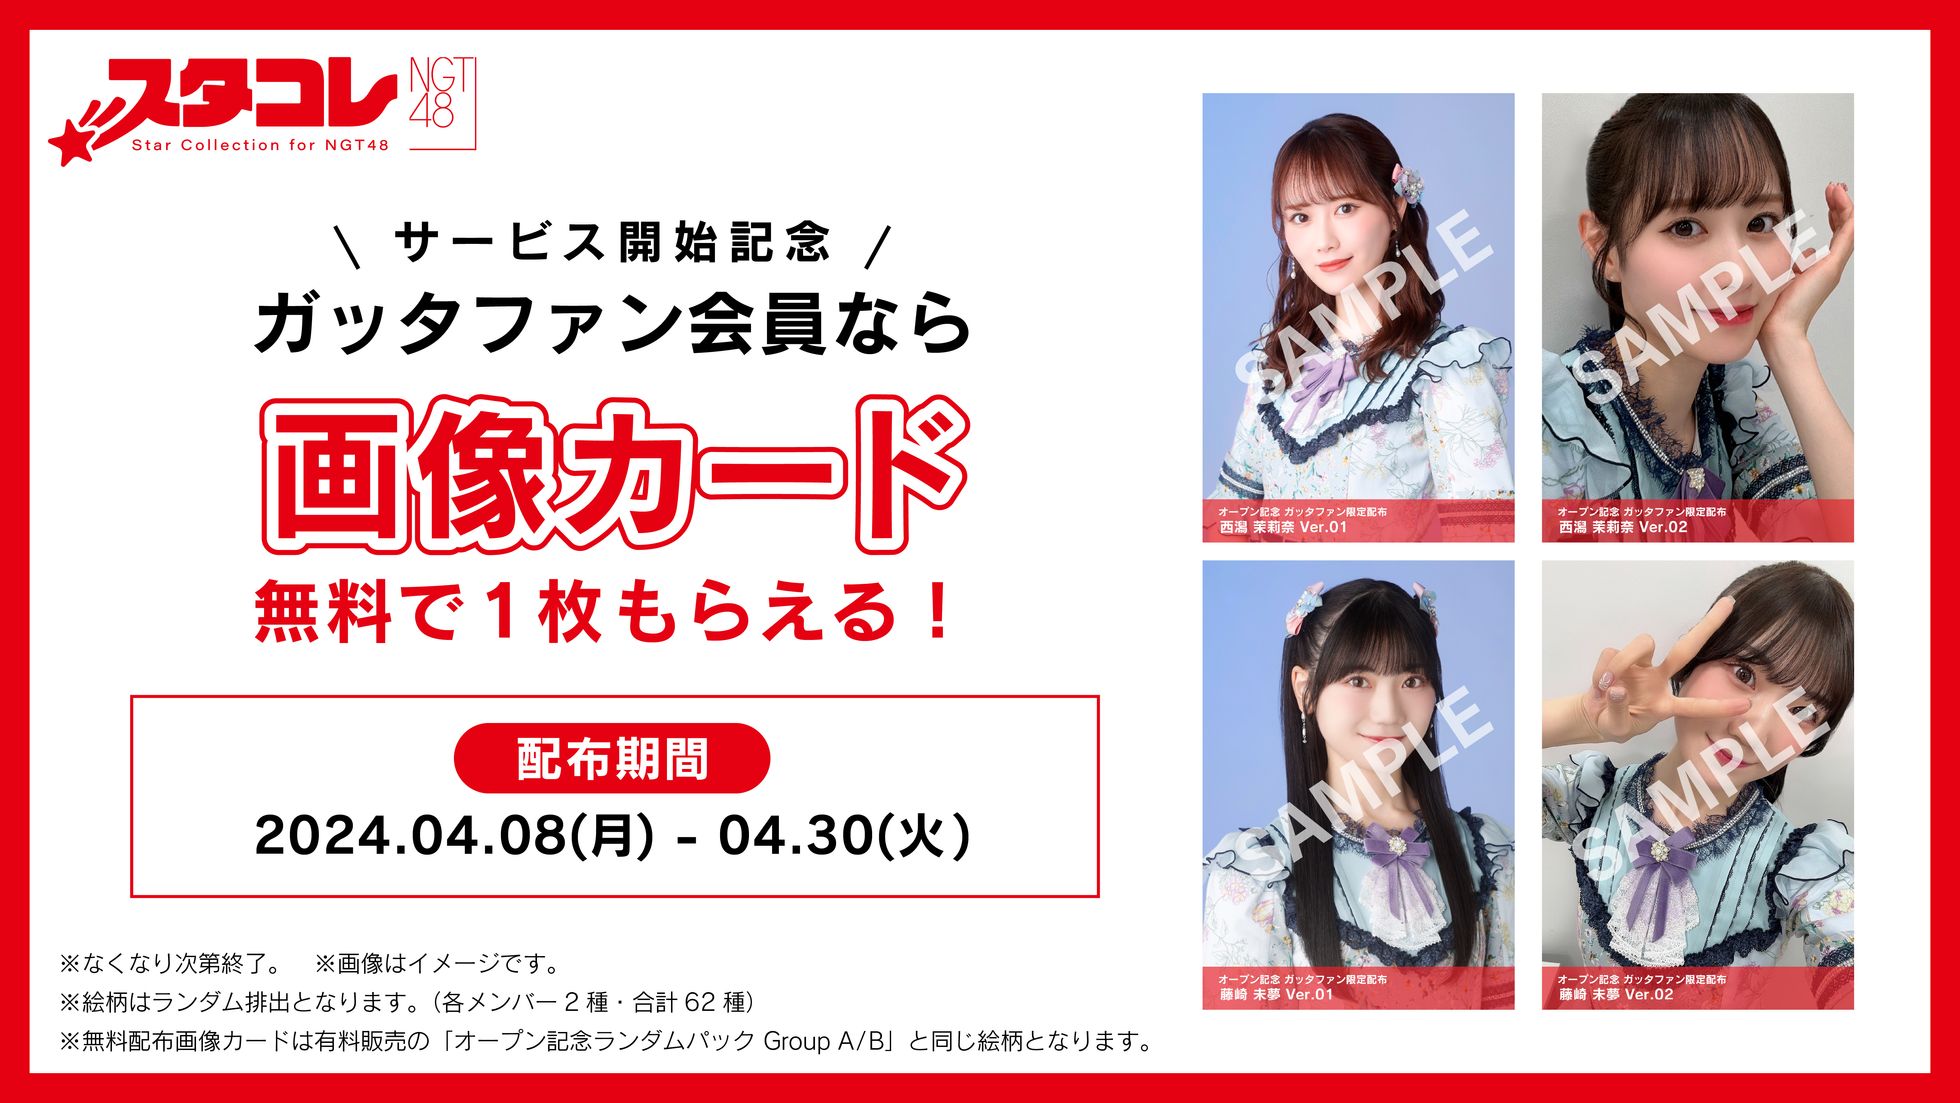 NGT48 OFFICIAL MEMBERSHIP SITE